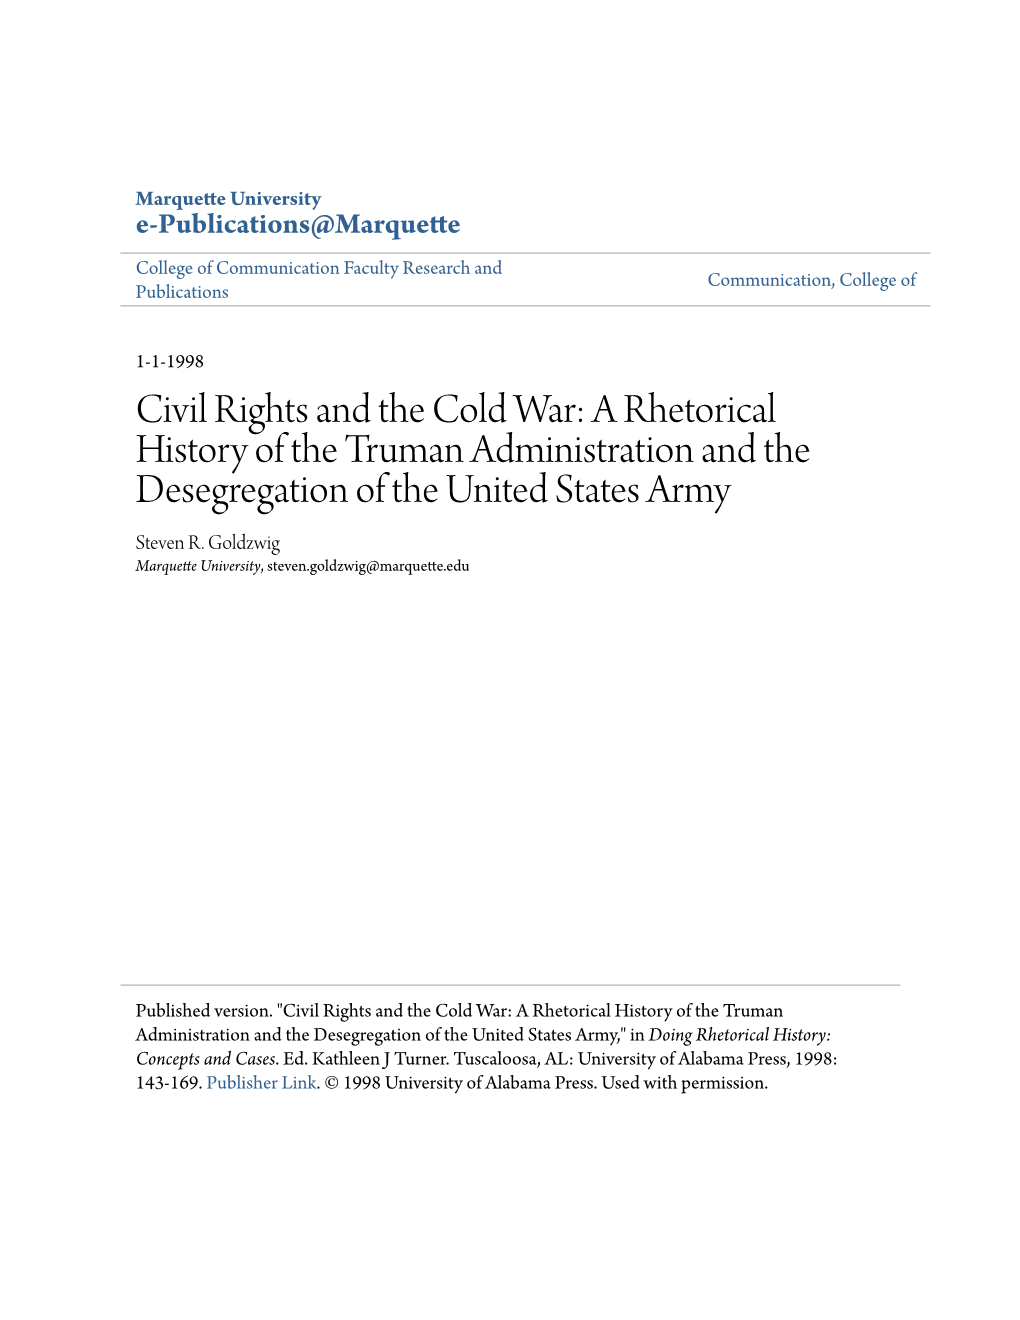 Civil Rights and the Cold War: a Rhetorical History of the Truman Administration and the Desegregation of the United States Army Steven R